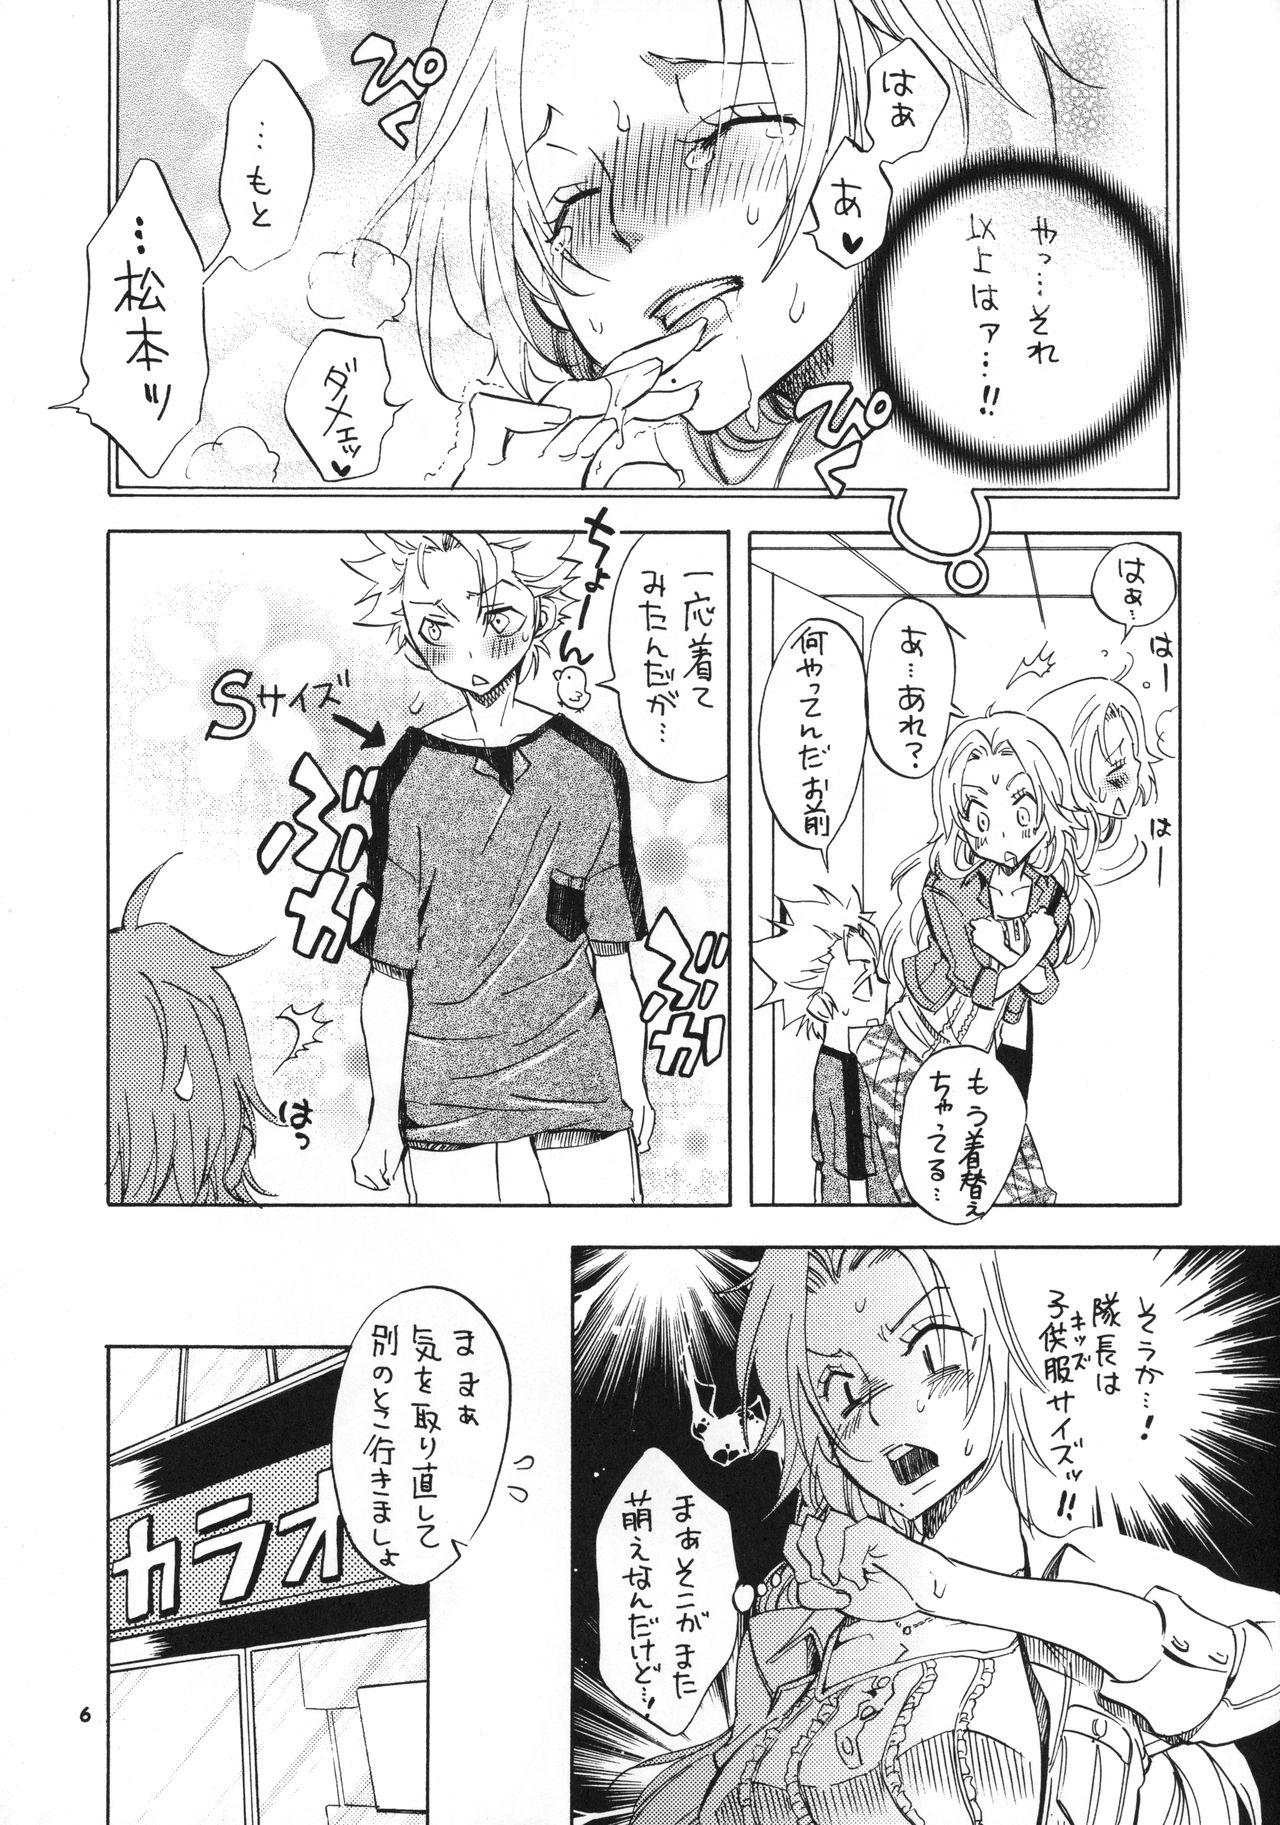 Lez Taichou to Date! - Bleach Pink Pussy - Page 6